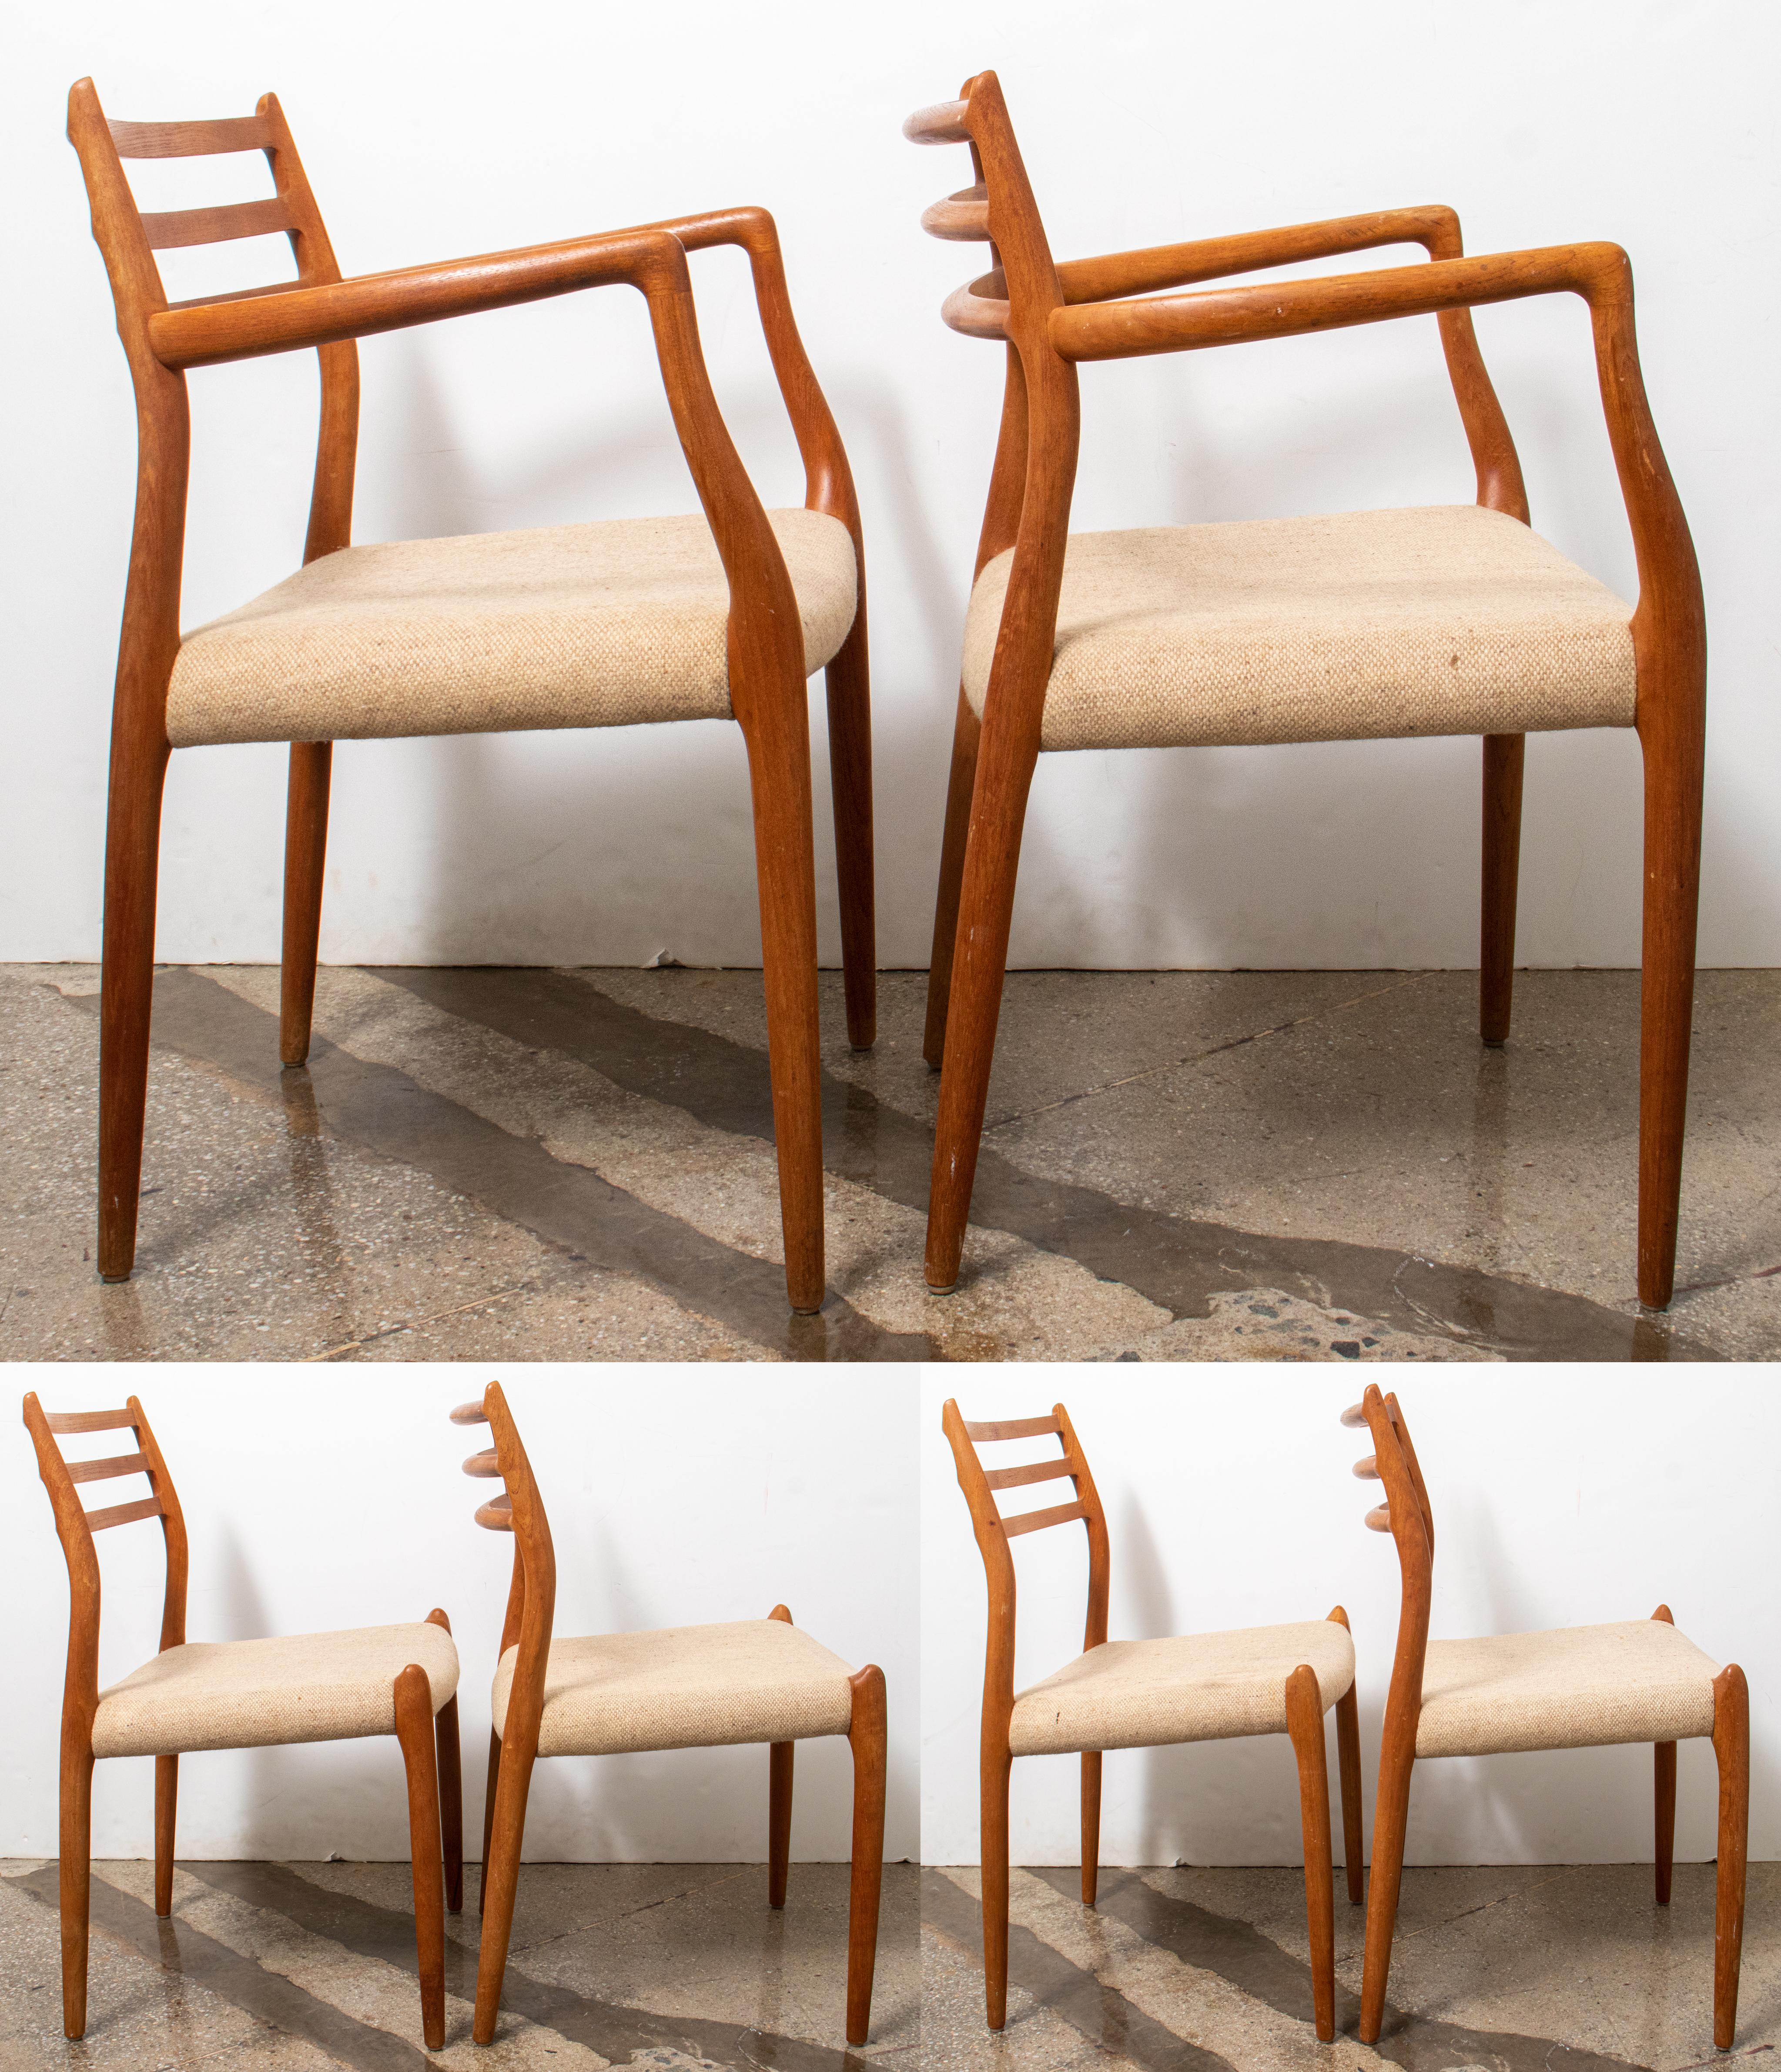 Niels Moller Danish Modern Dining Chairs, 6 2